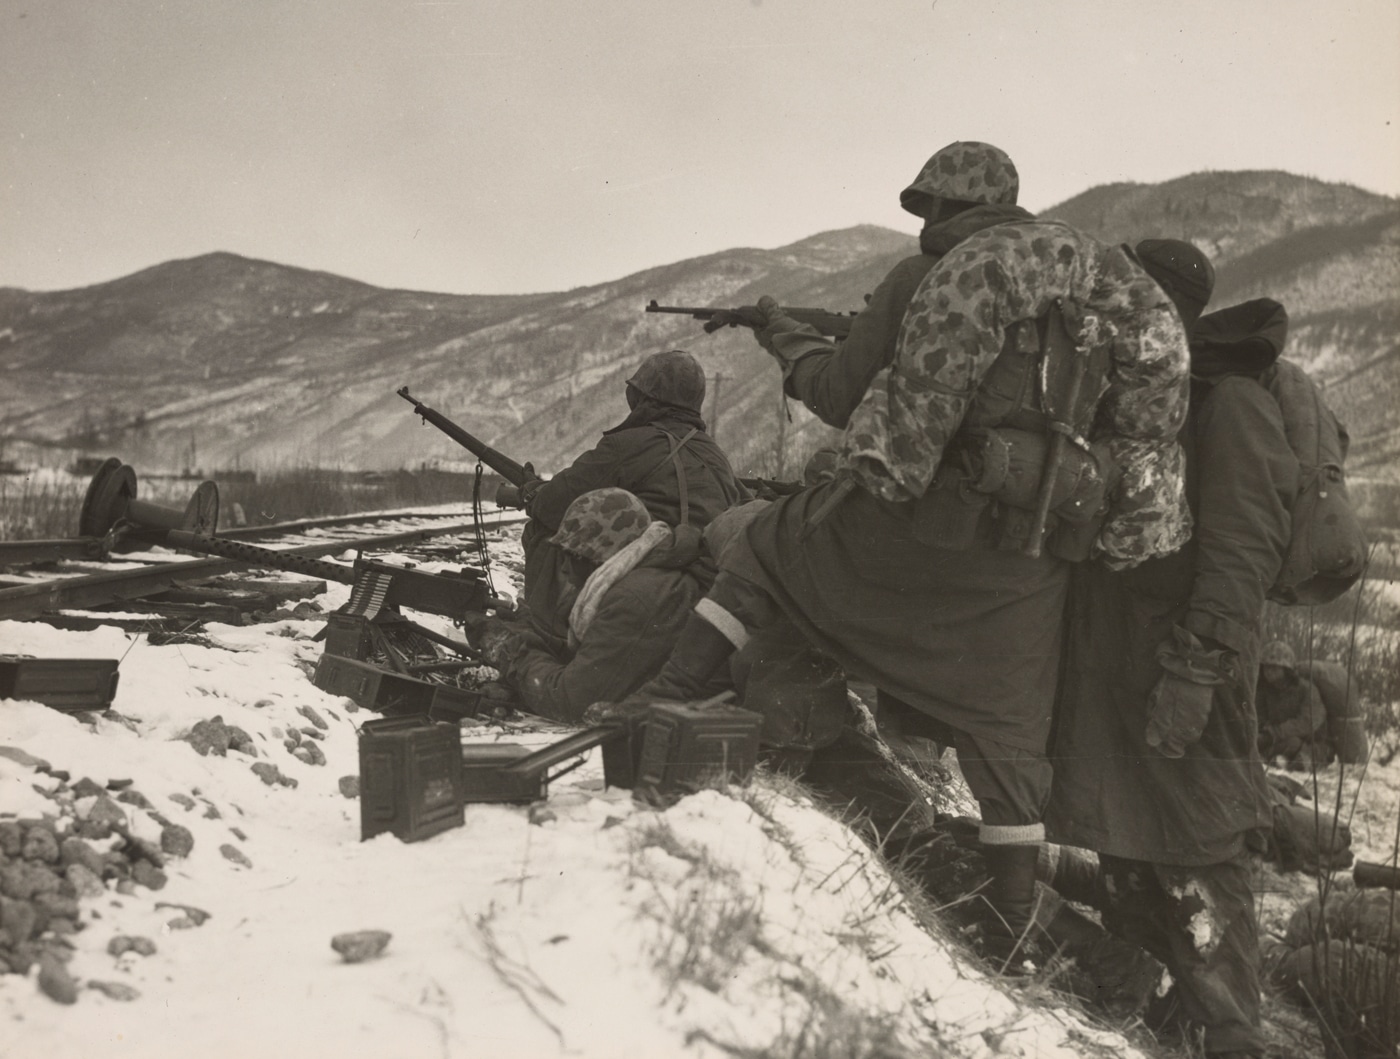 US Marines engage Chinese troops during the Korean War in this photo taken at Chosin Reservoir in North Korea. North Korean forces had been soundly beaten prior to the Chinese invasion that led to the Battle of the Chosin Reservoir.